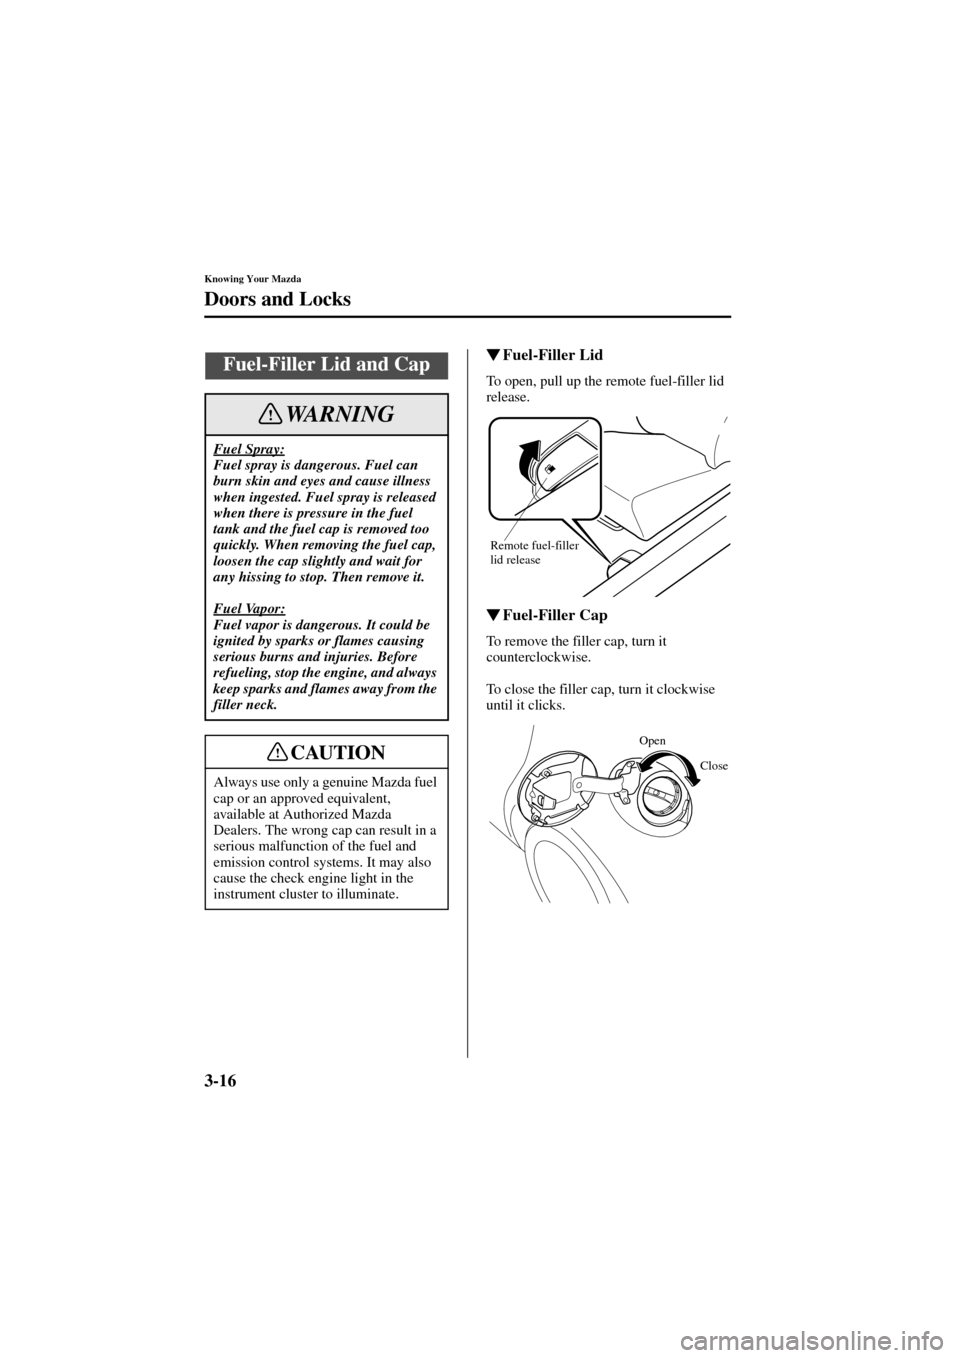 MAZDA MODEL 6 2004   (in English) User Guide 3-16
Knowing Your Mazda
Doors and Locks
Form No. 8R29-EA-02I
Fuel-Filler Lid
To open, pull up the remote fuel-filler lid 
release.
Fuel-Filler Cap
To remove the filler cap, turn it 
counterclockwise